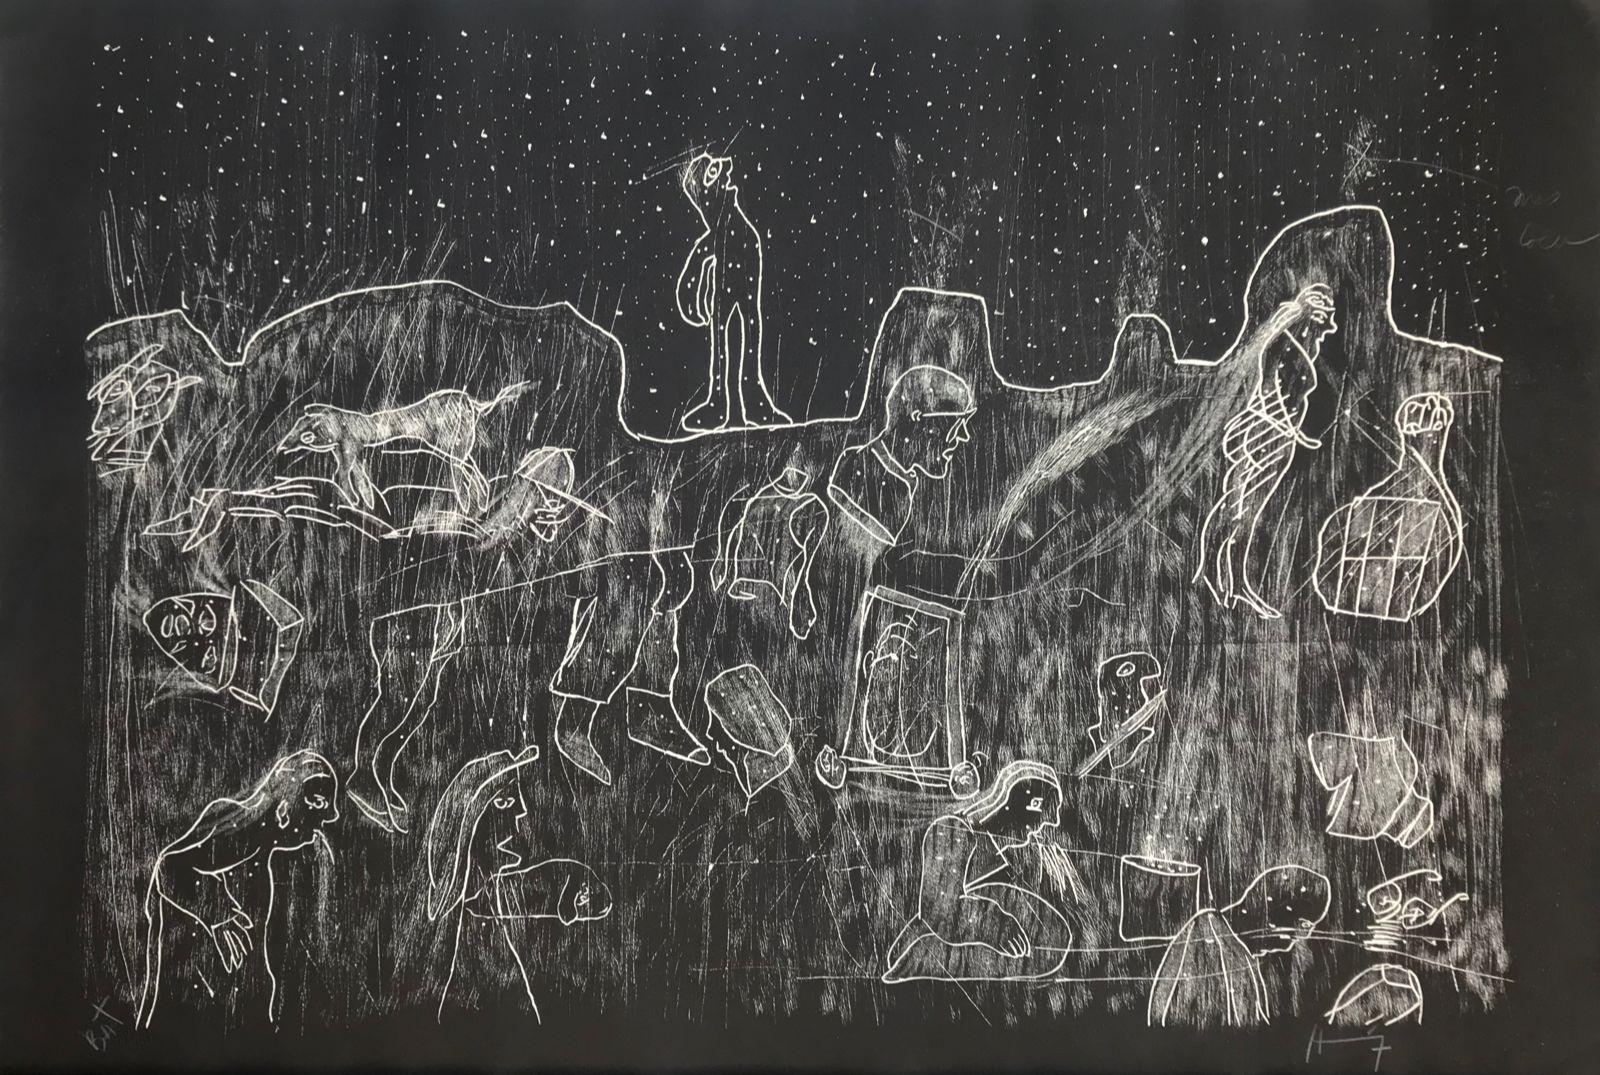 Sergio Hernández, "Untitled", 2011, Woodcut, 29.9x44.1 in